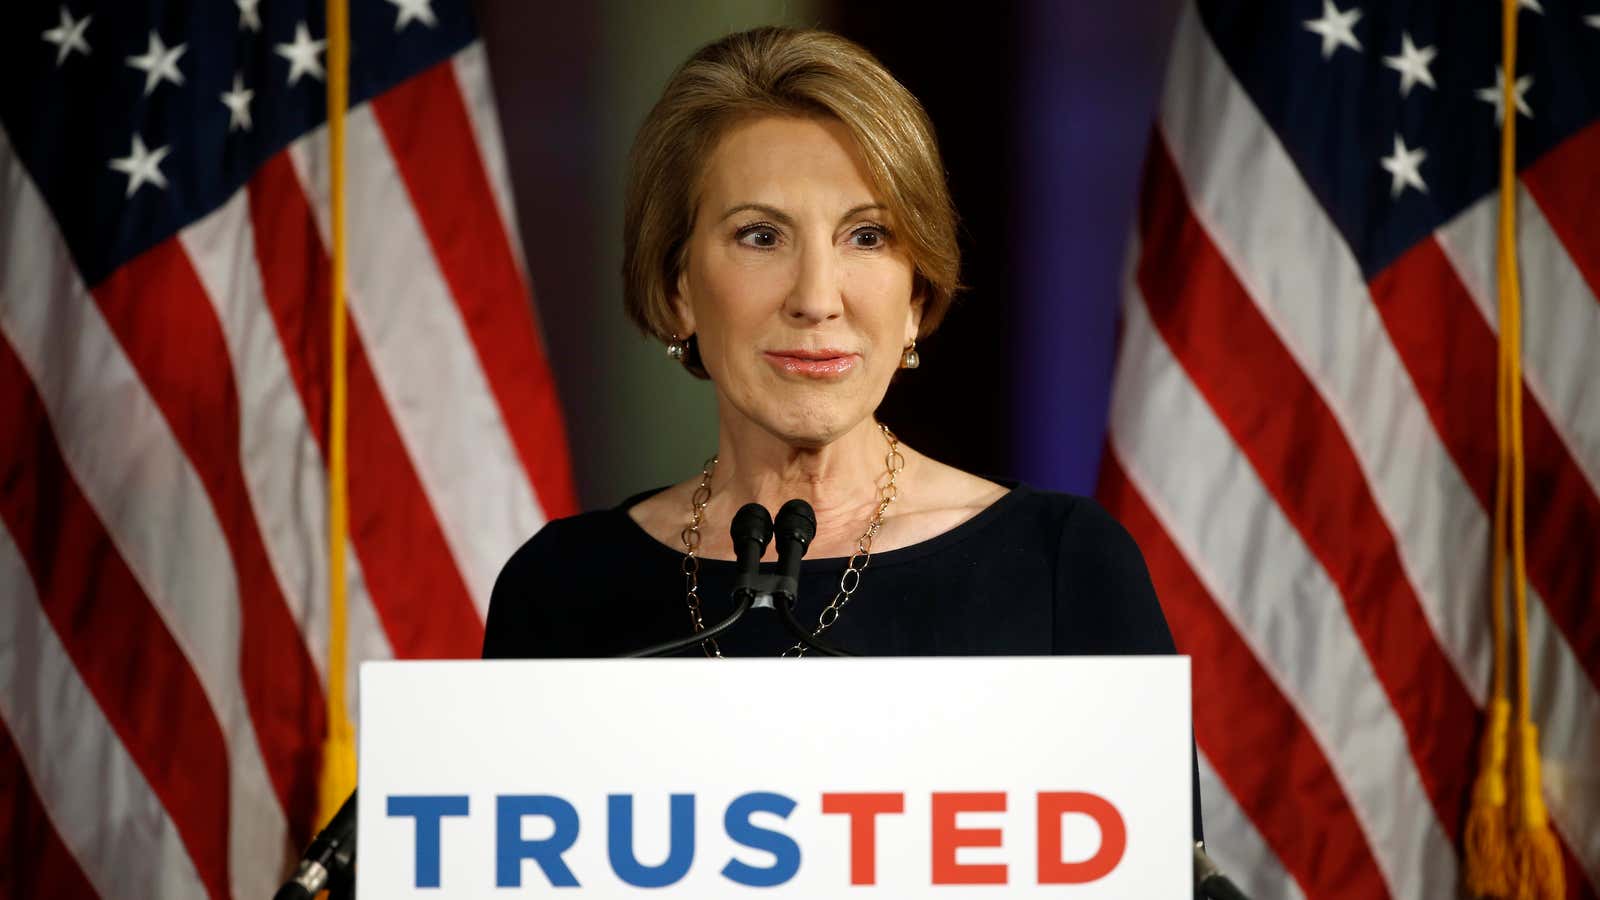 Carly Fiorina campaigns for Ted Cruz in Philadelphia ahead of the Pennsylvania primary.